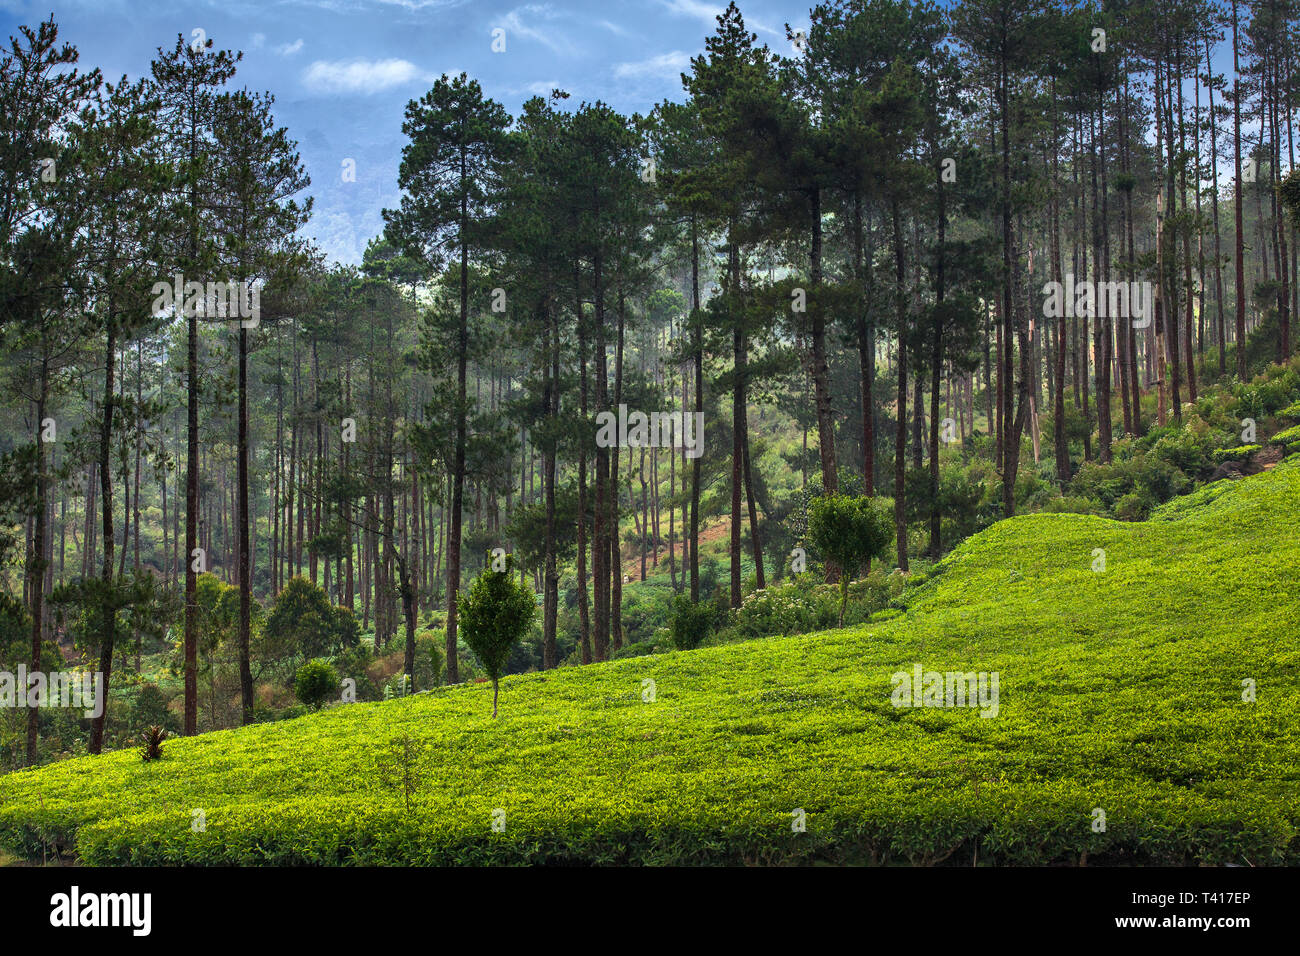 Pine tree forest next to a tea plant, Indonesia Stock Photo